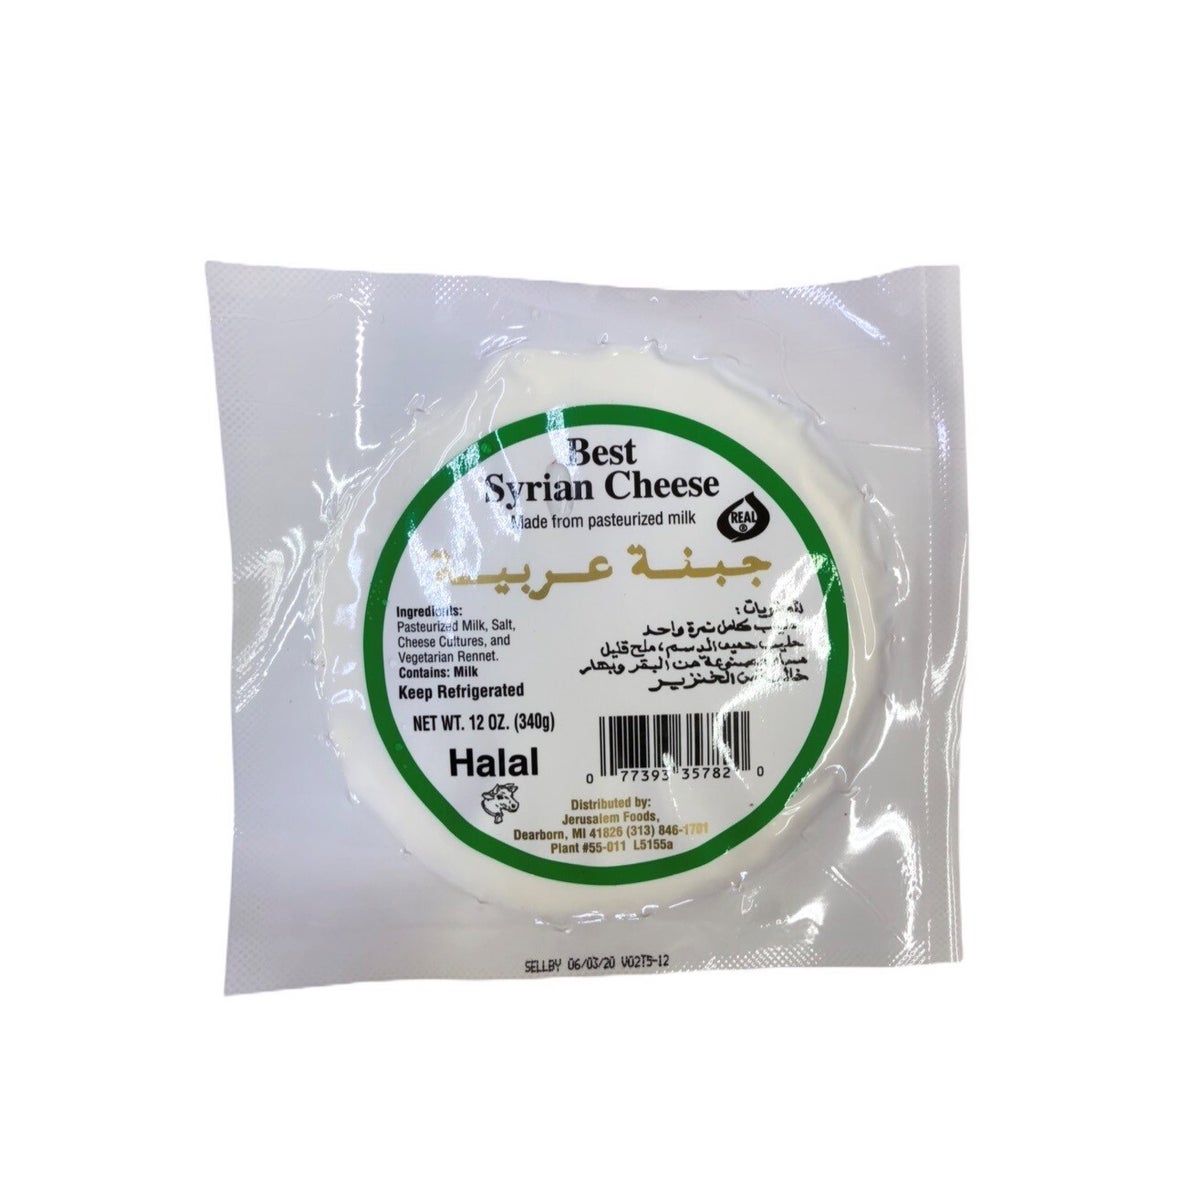 BEST SYRIAN CHEESE